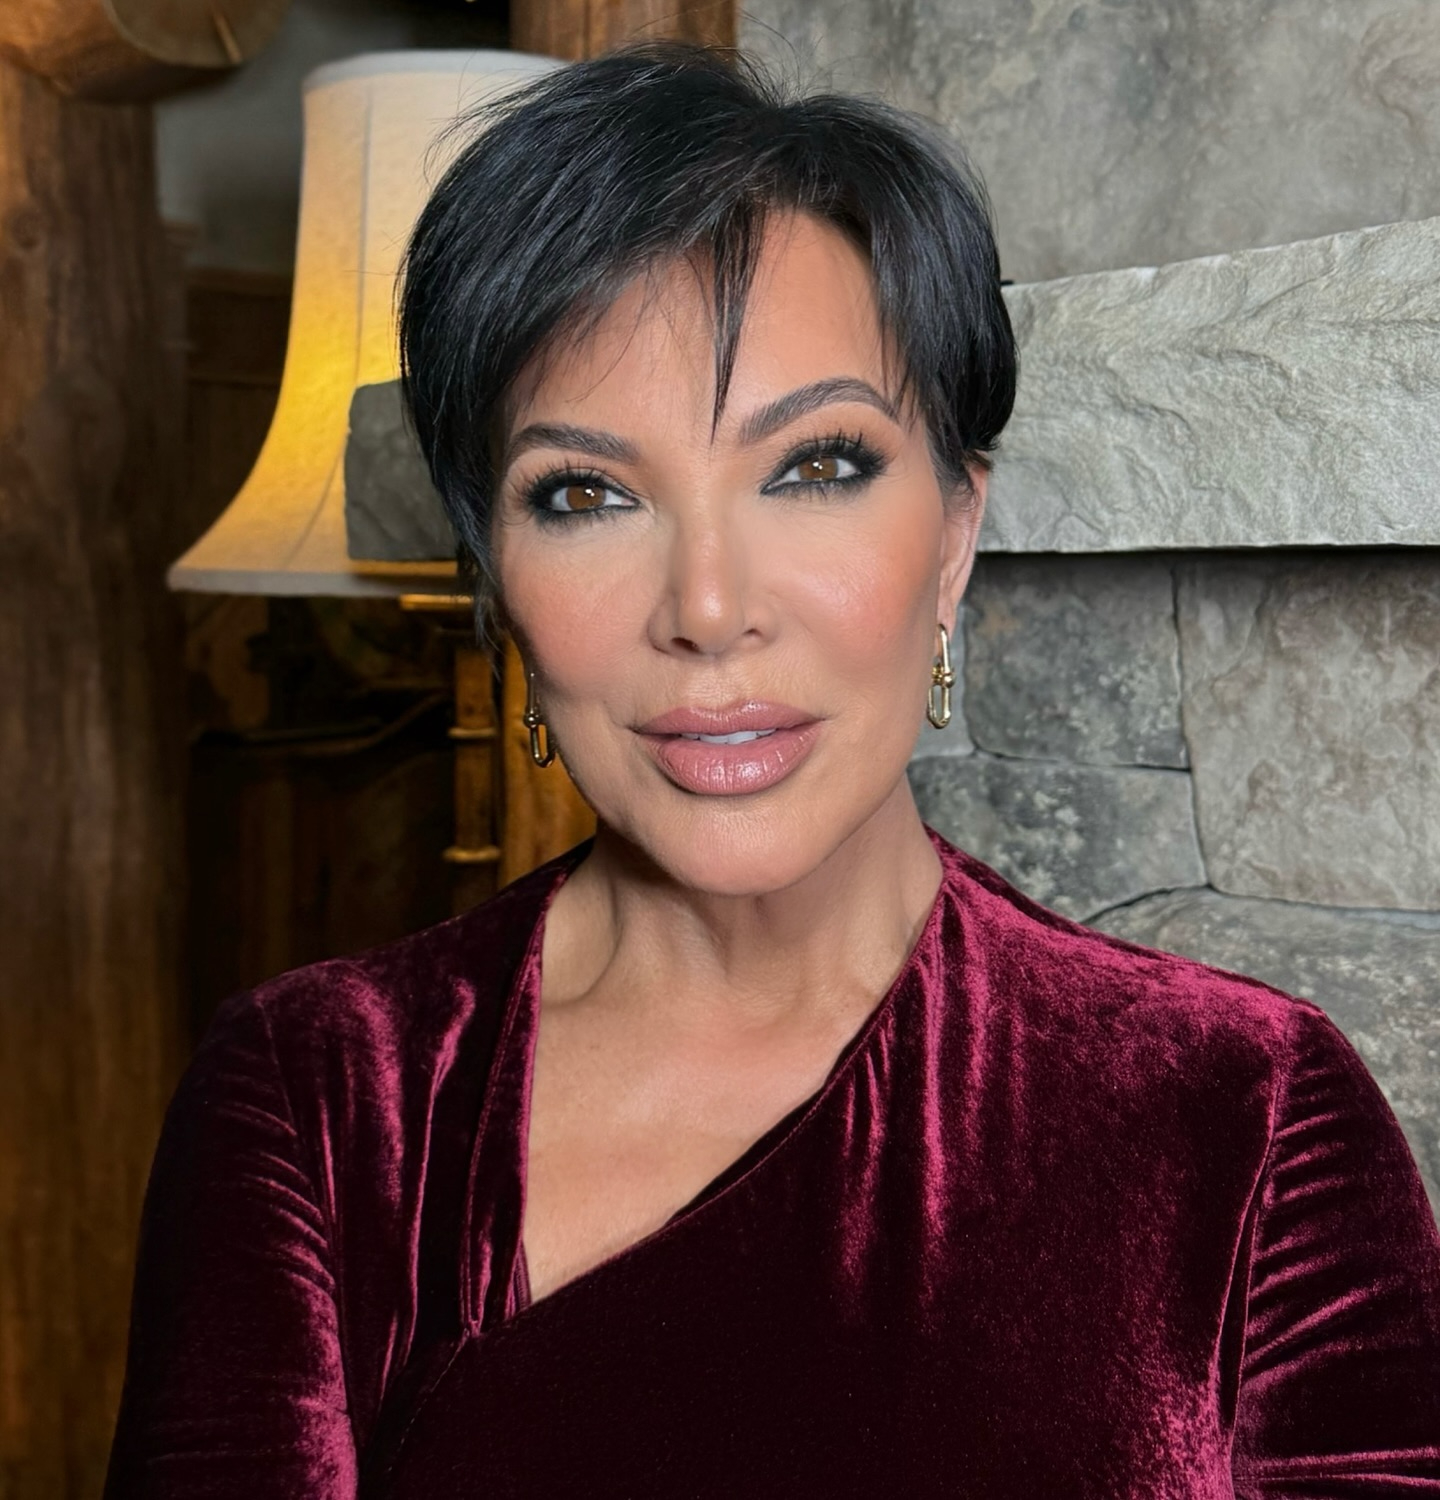 Kris Jenner responded with: 'You're not even the fart'